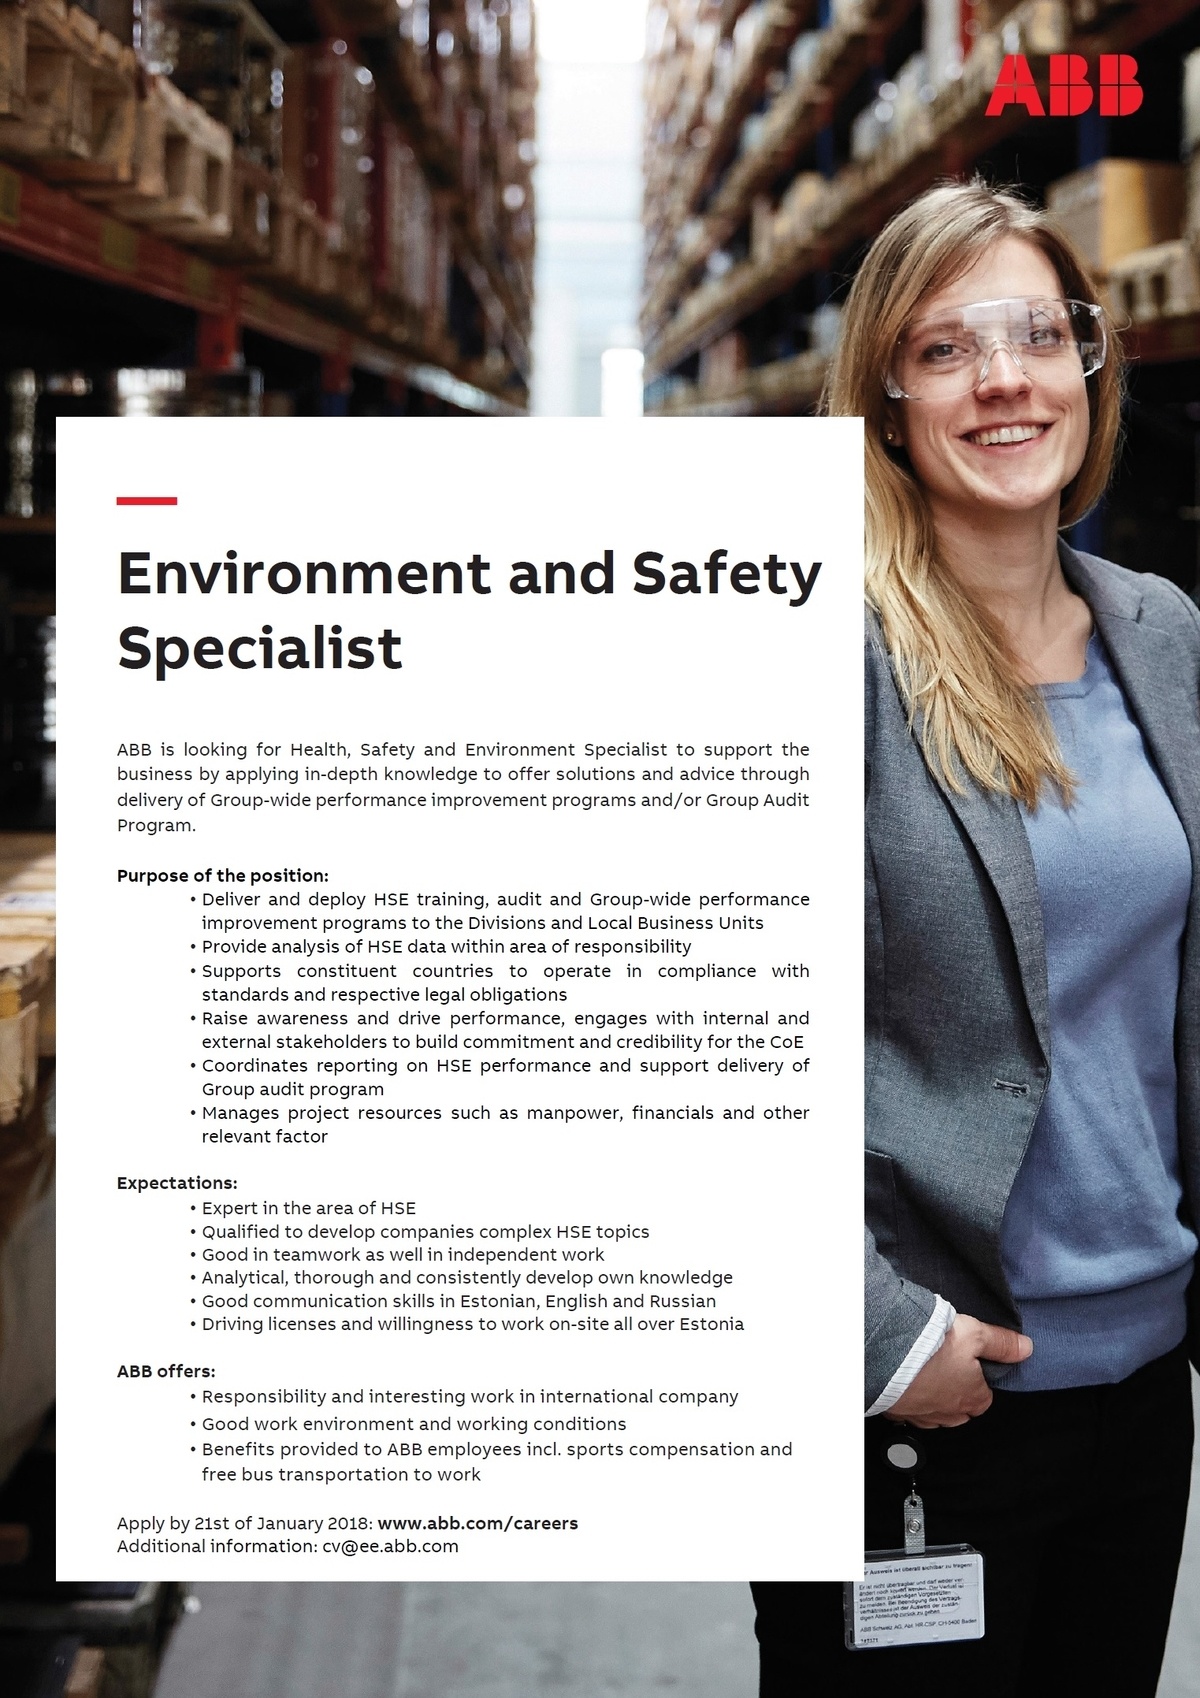 ABB AS Environment and Safety Specialist